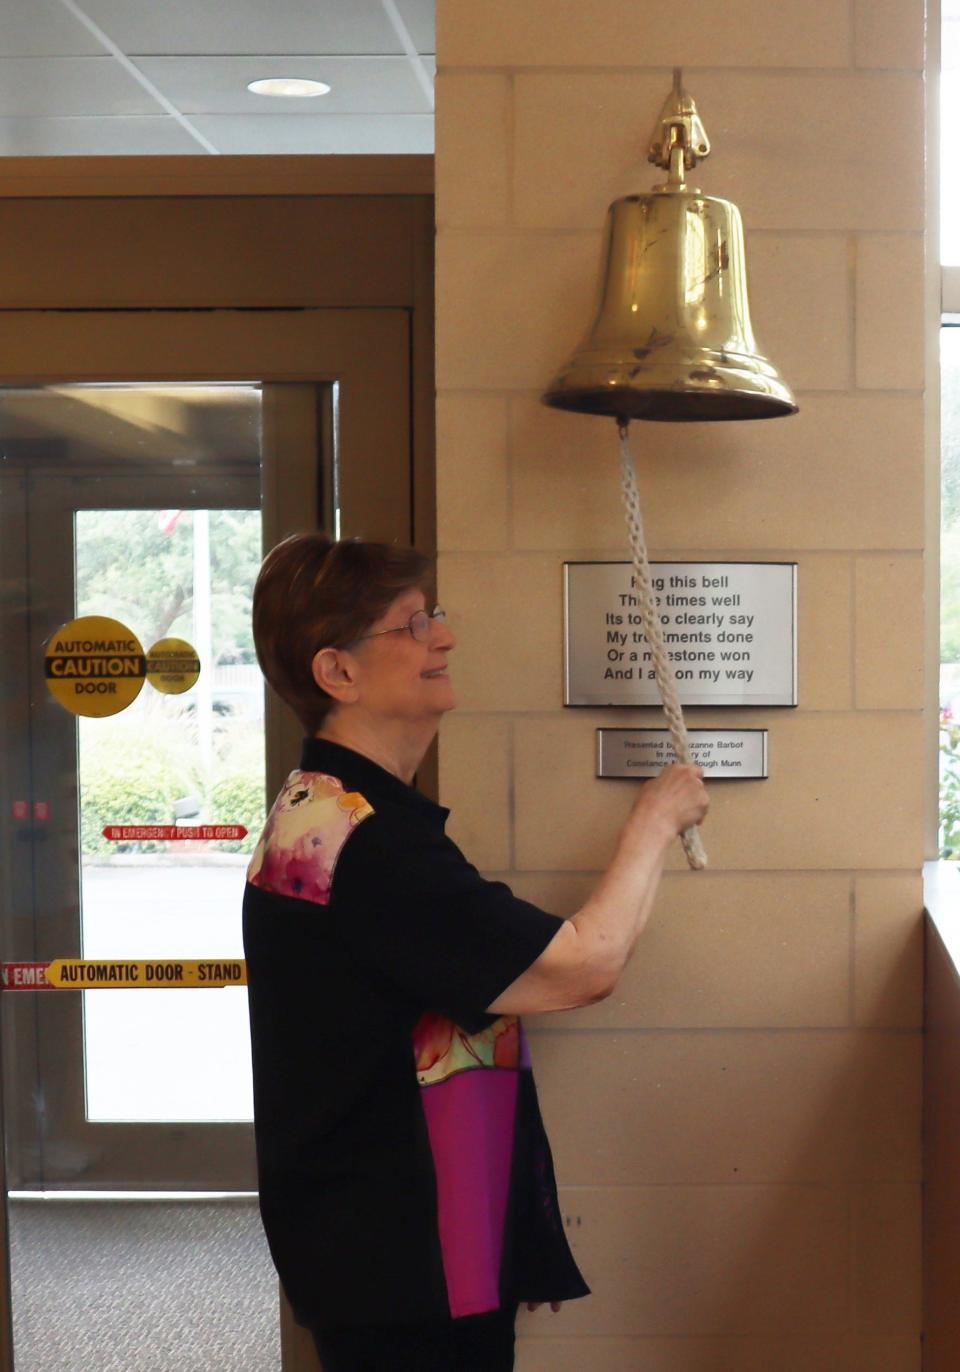 Alicia Weaver, a cancer patient at Lewis Cancer Research Pavilion, rings the survivor's bell. She volunteered for a clinical trail because she's a "people lover".